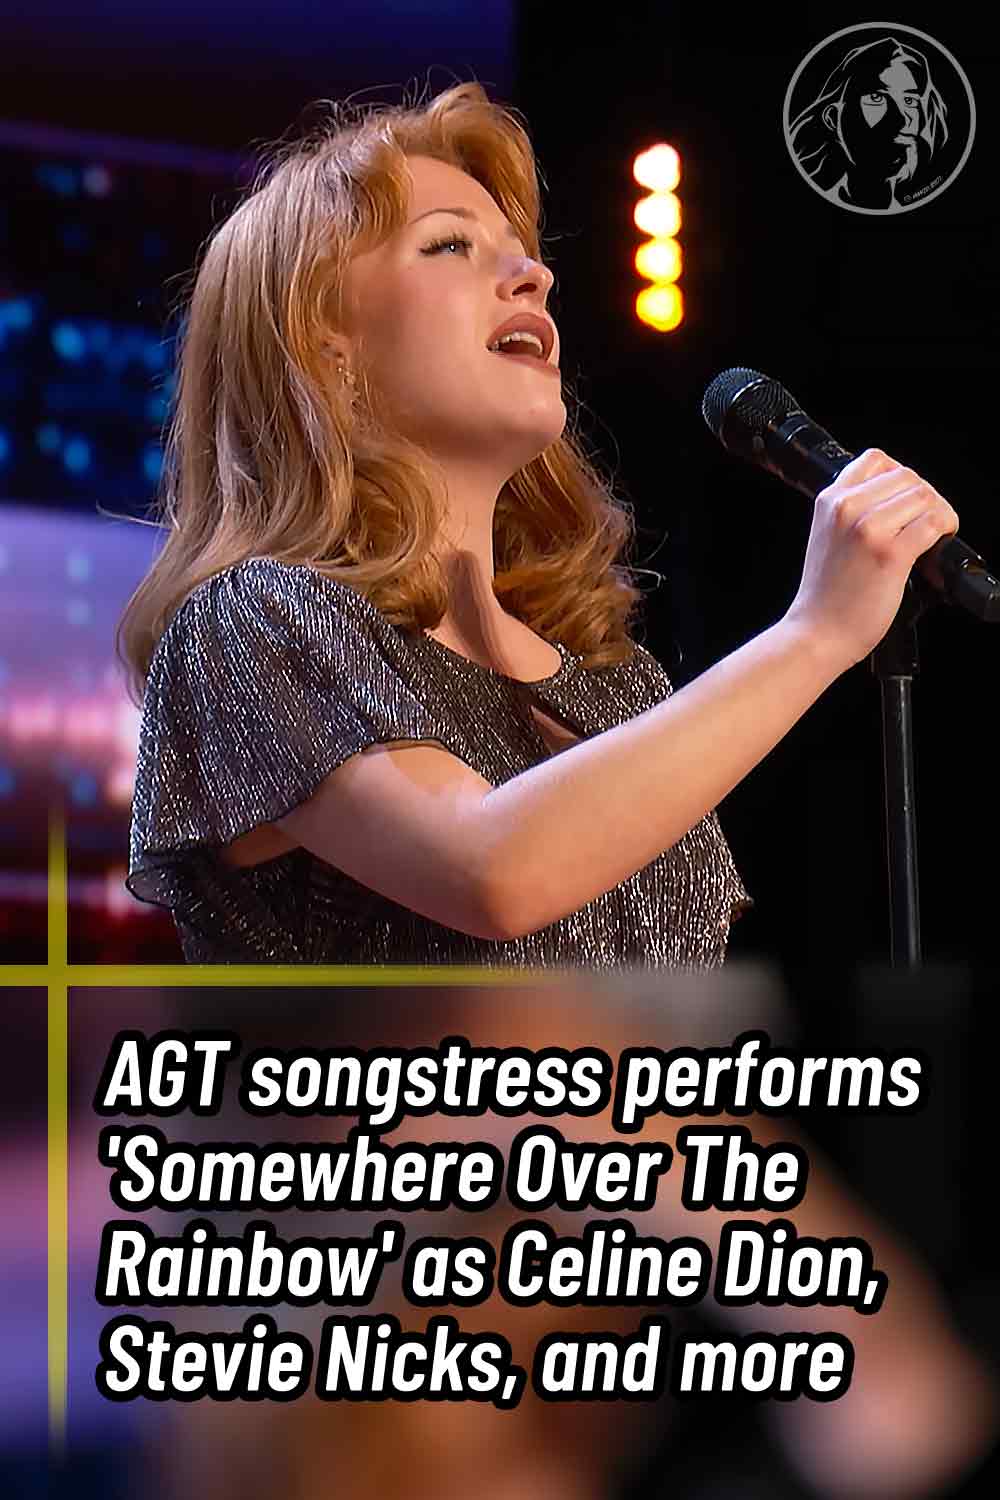 AGT songstress performs \'Somewhere Over The Rainbow\' as Celine Dion, Stevie Nicks, and more